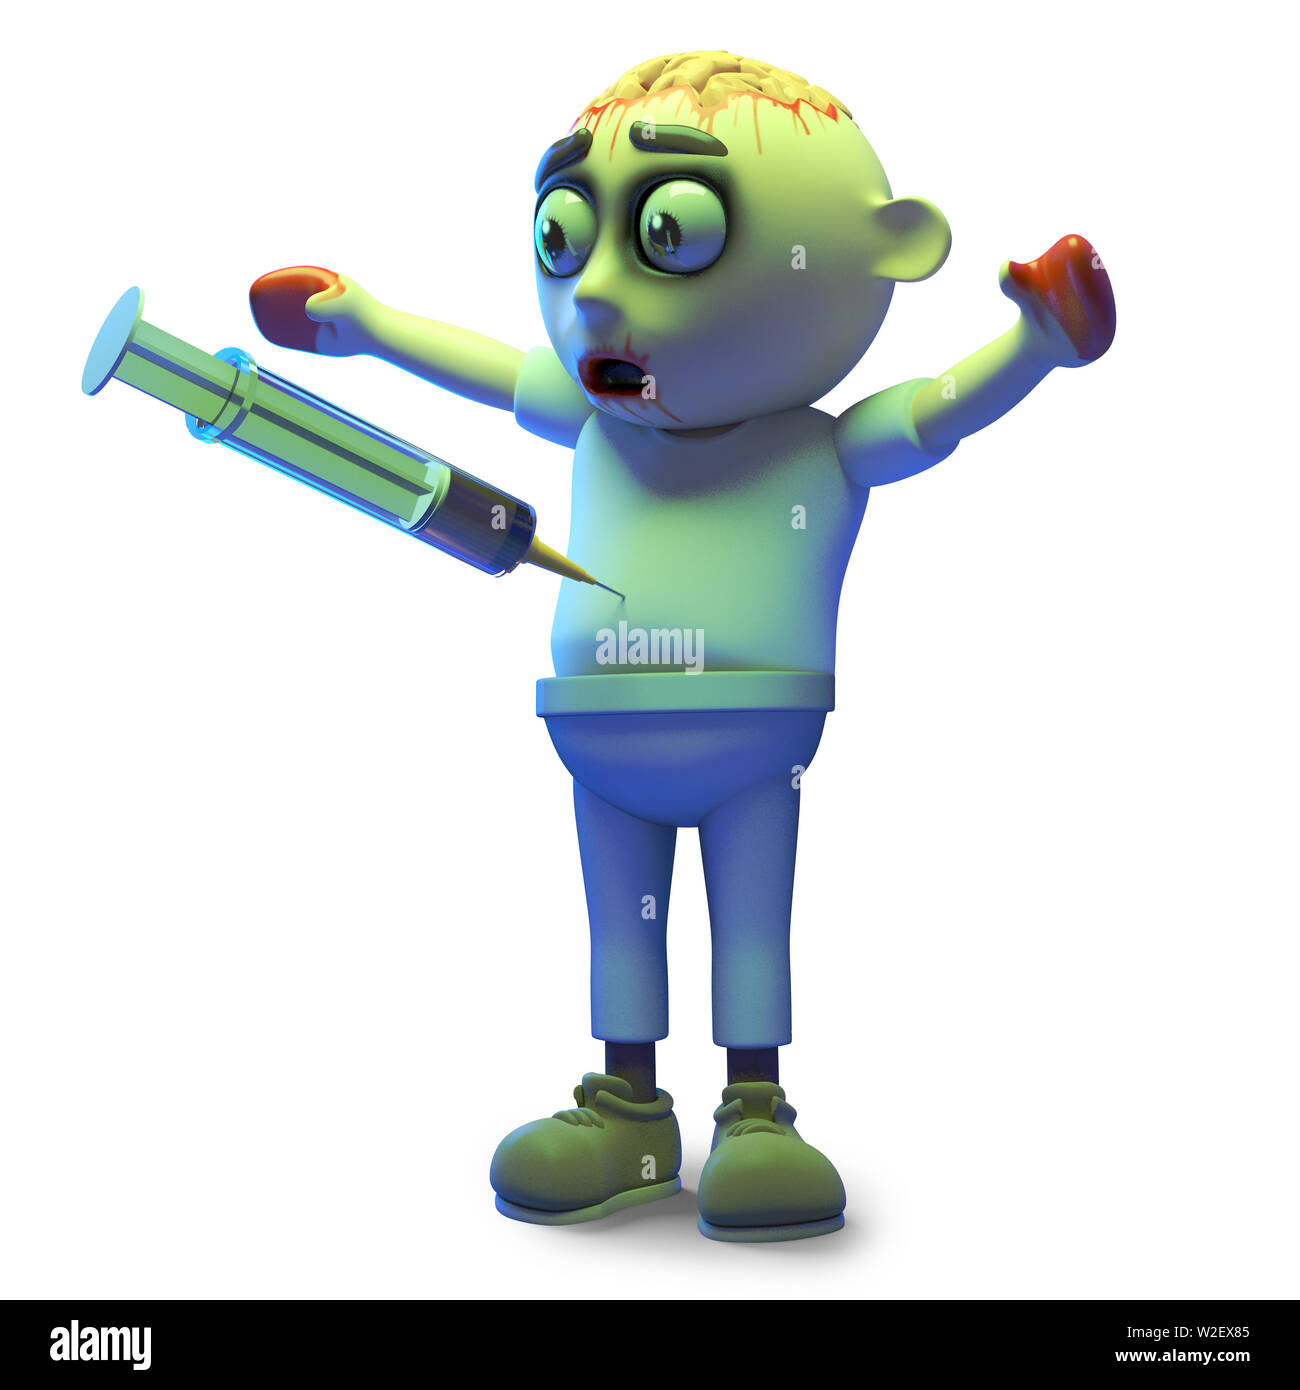 Poor zombie monster had trouble with a syringe, 3d illustration render Stock Photo